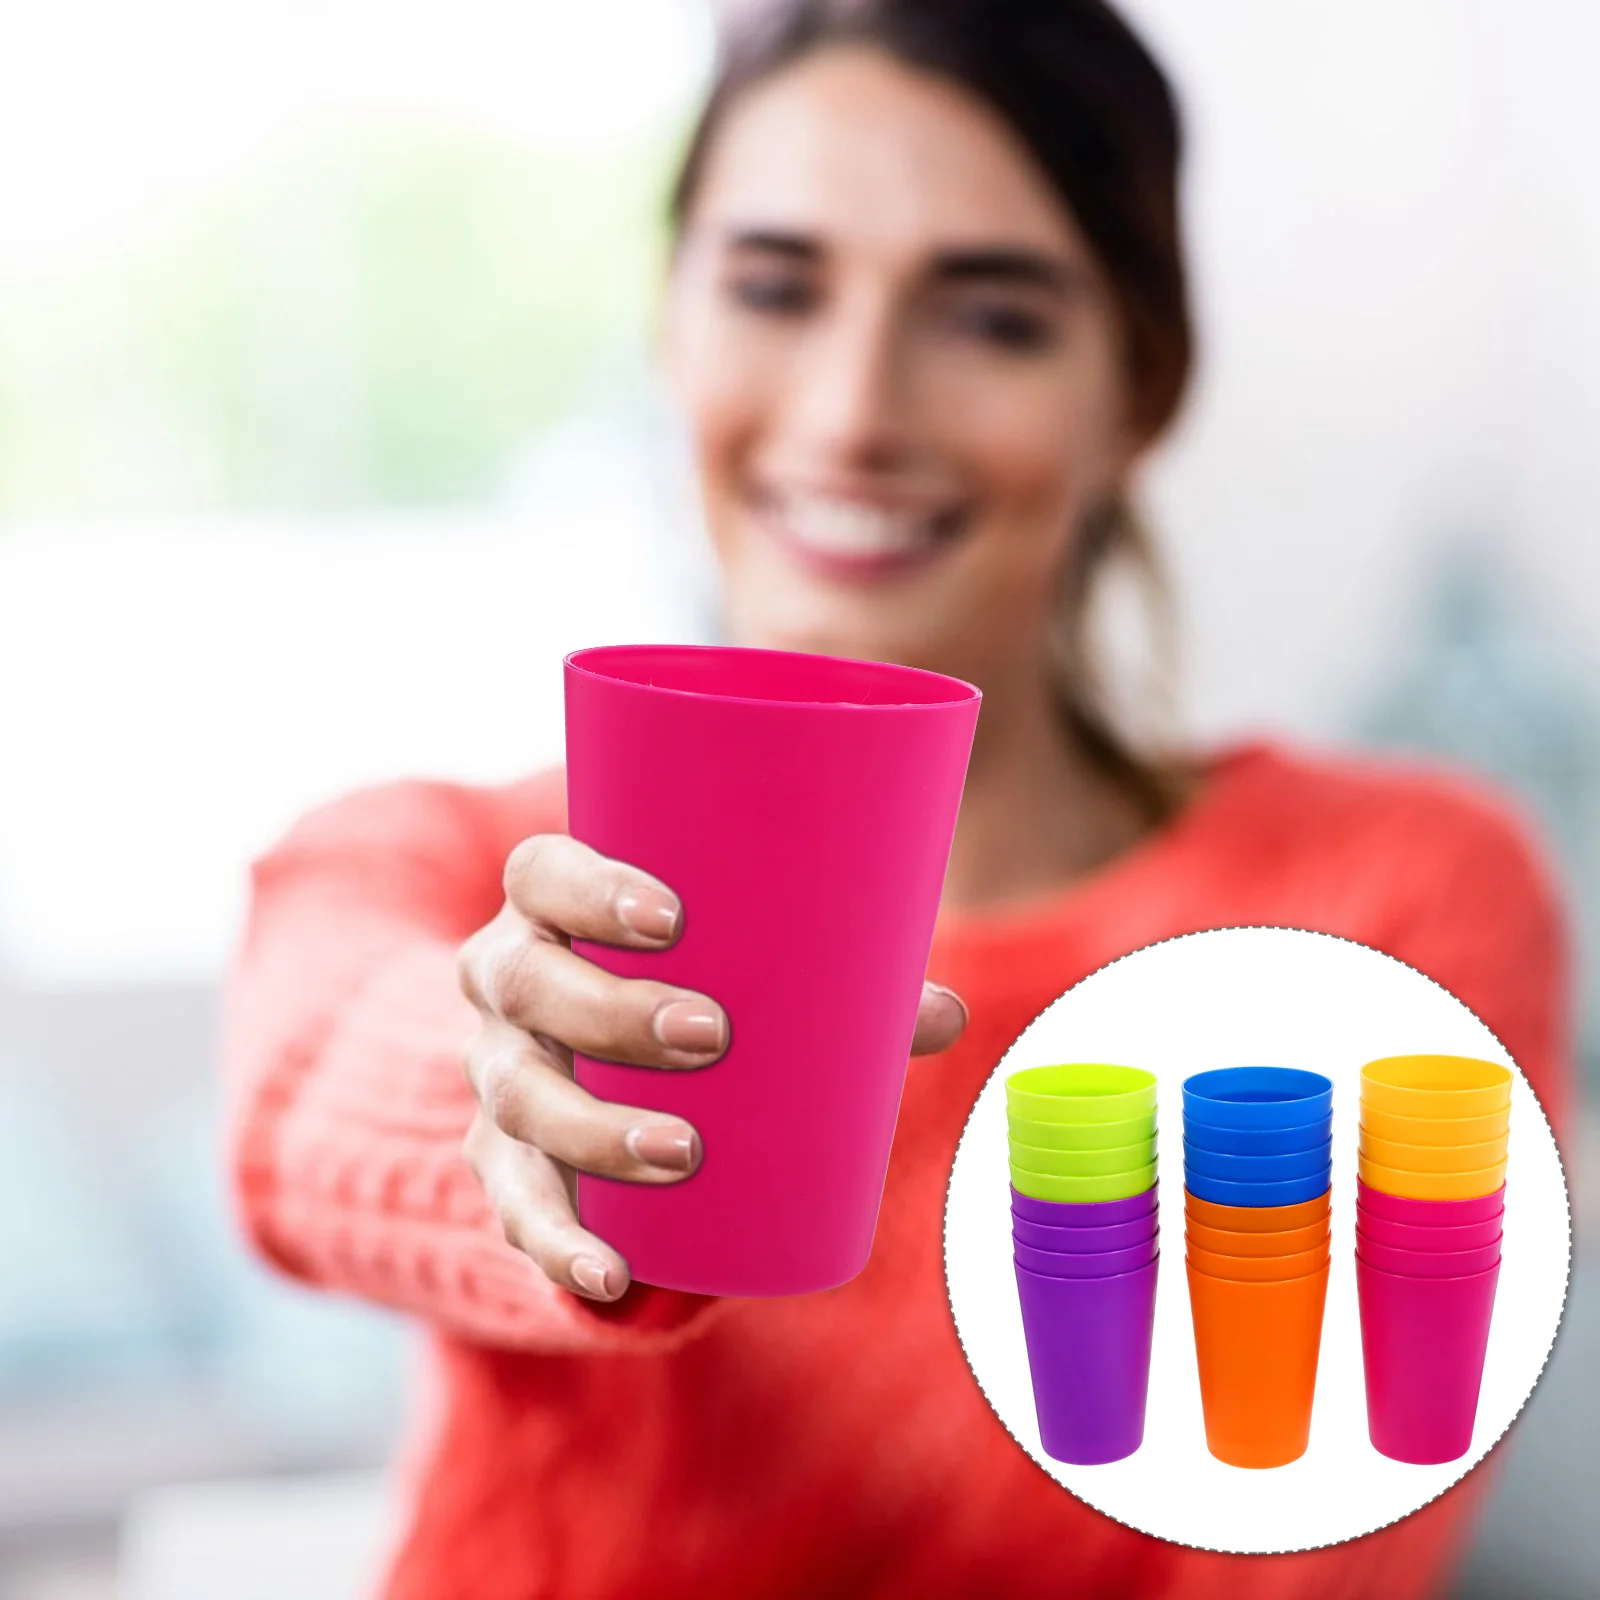 

24 Pcs Hot Water Tank Plastic Drinking Cup Cups Bulk Colorful Party Supplies Tumblers Beer Bear